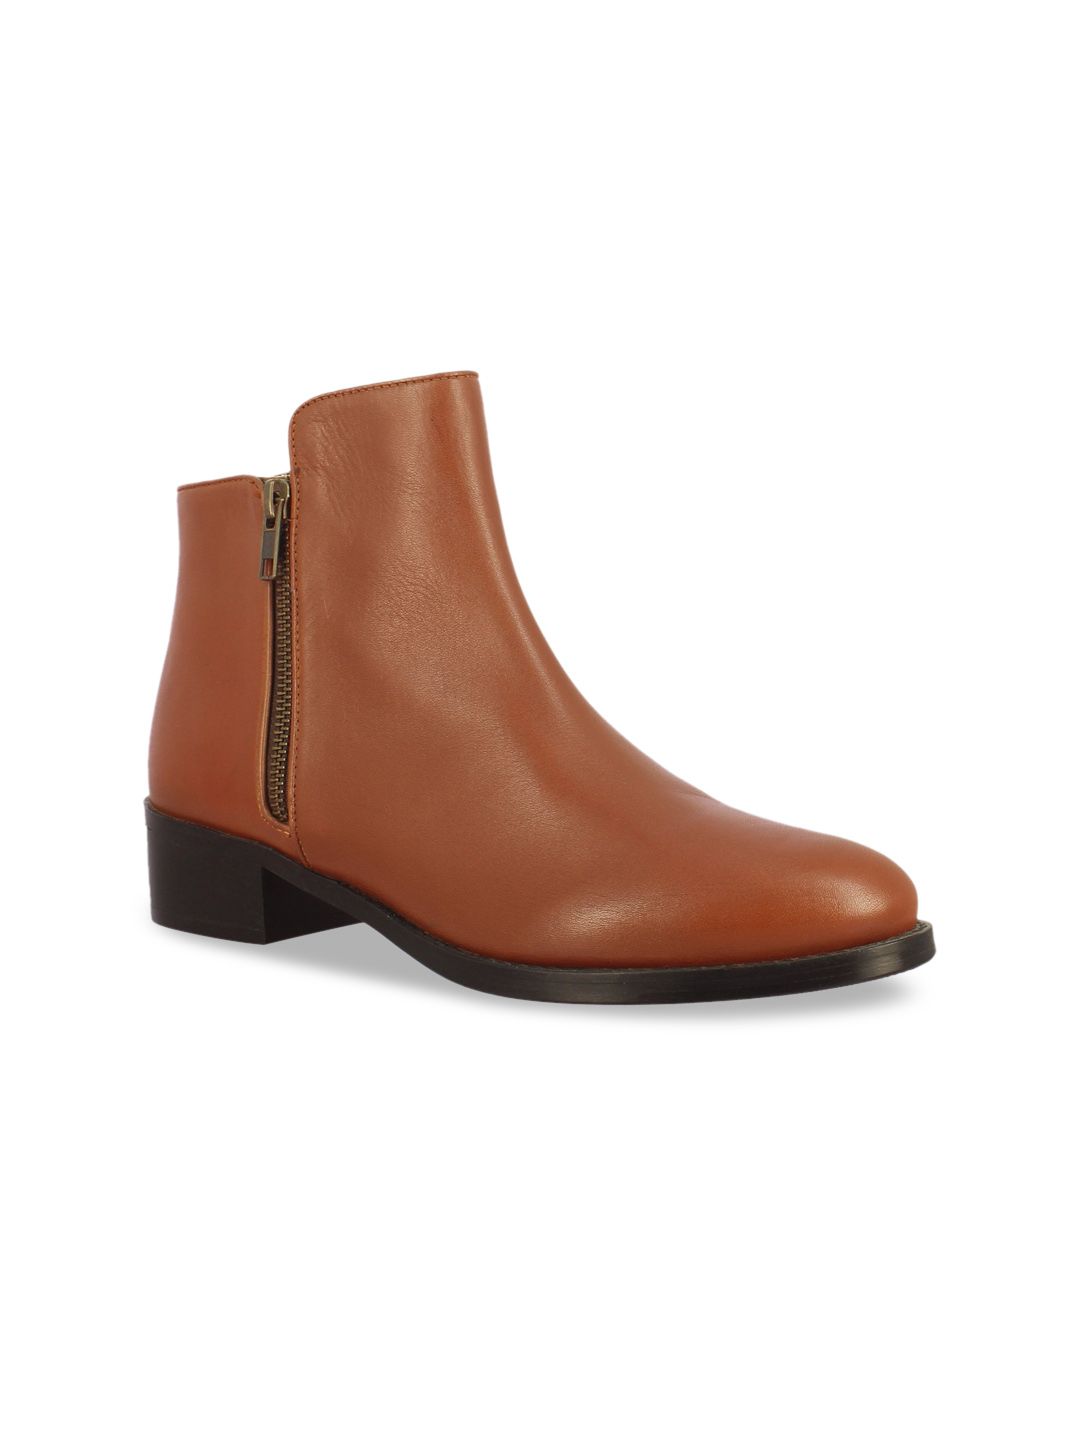 Saint G Women Tan Brown Leather Ankle Boots Price in India